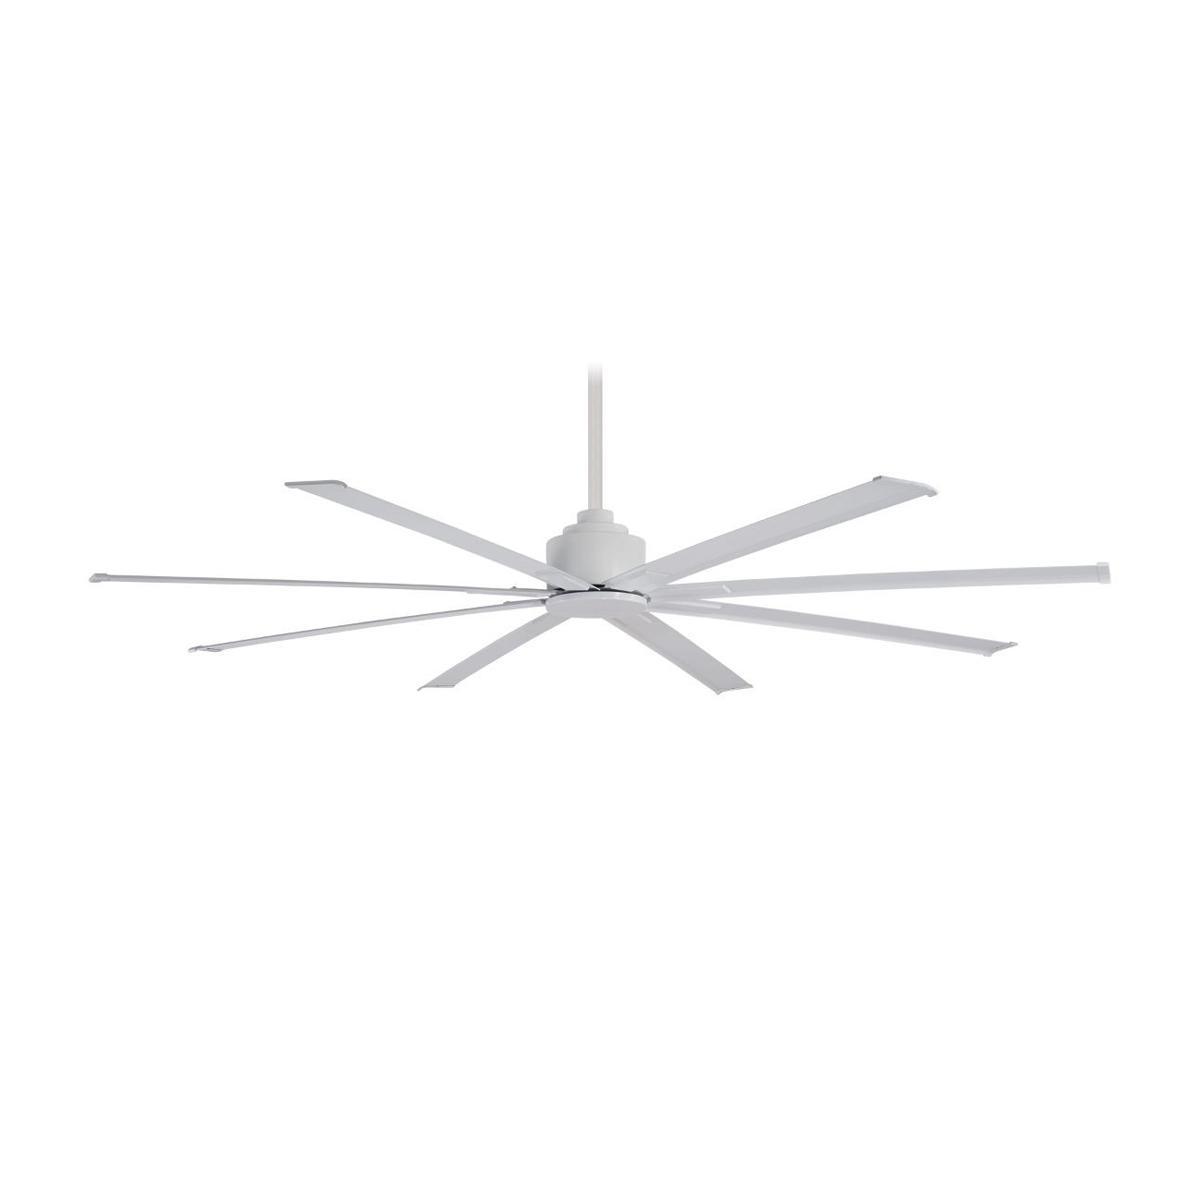 Xtreme H2O 65 Inch Windmill Outdoor Ceiling Fan With Remote - Bees Lighting